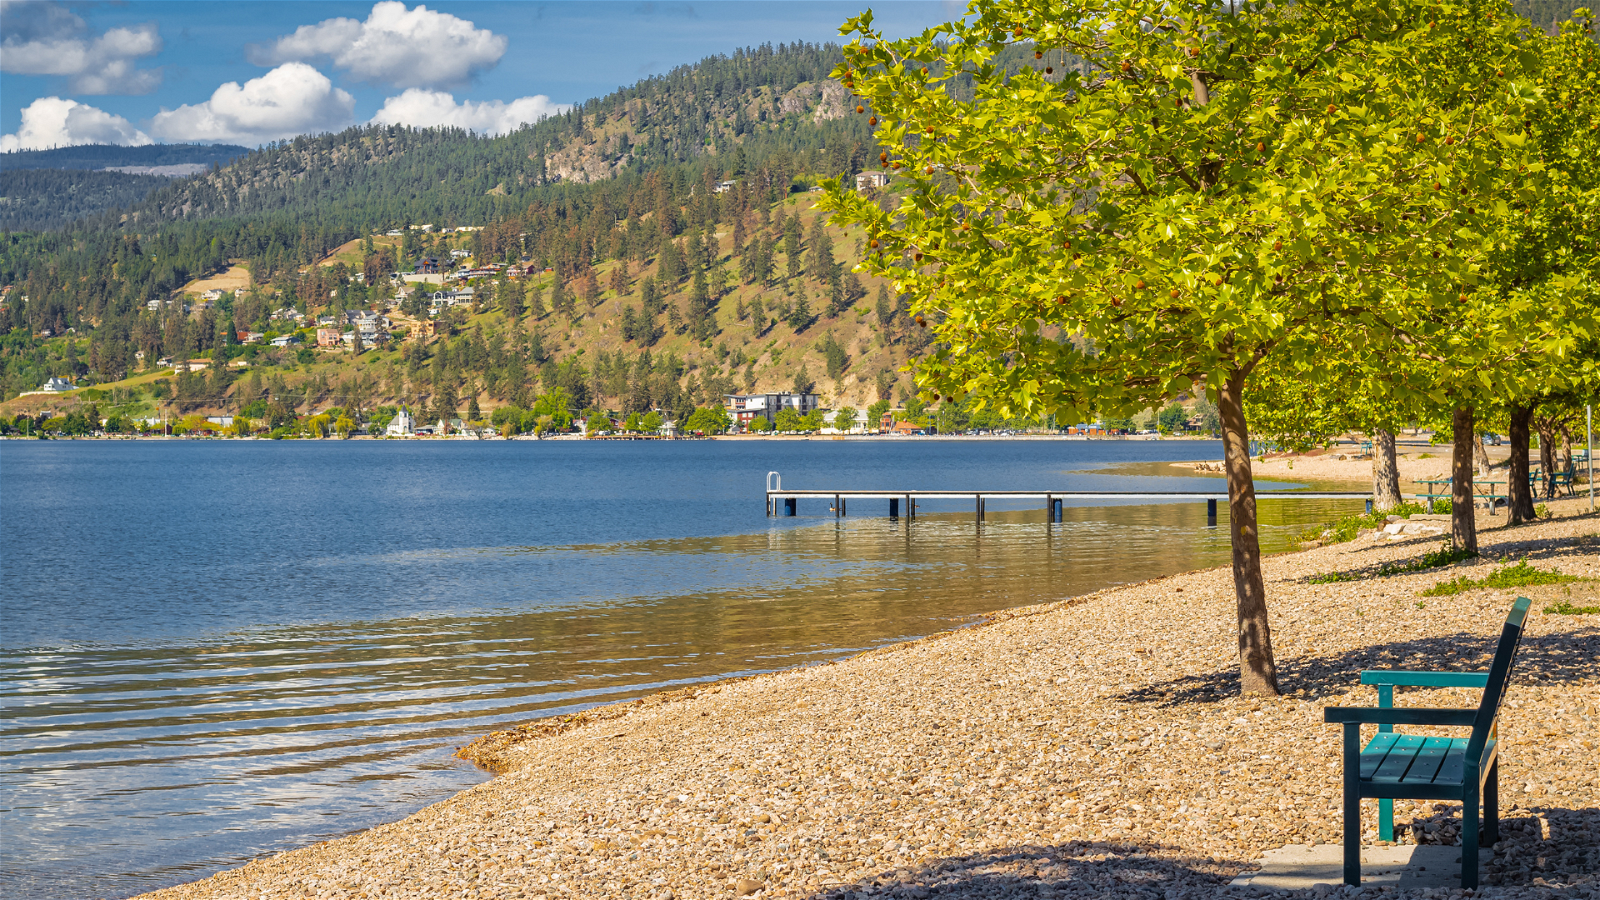 Summer day at the Okanagan lake beach in Kelowna BC - Keeping up with Kelowna - One of The Fastest Growing Cities in Canada 